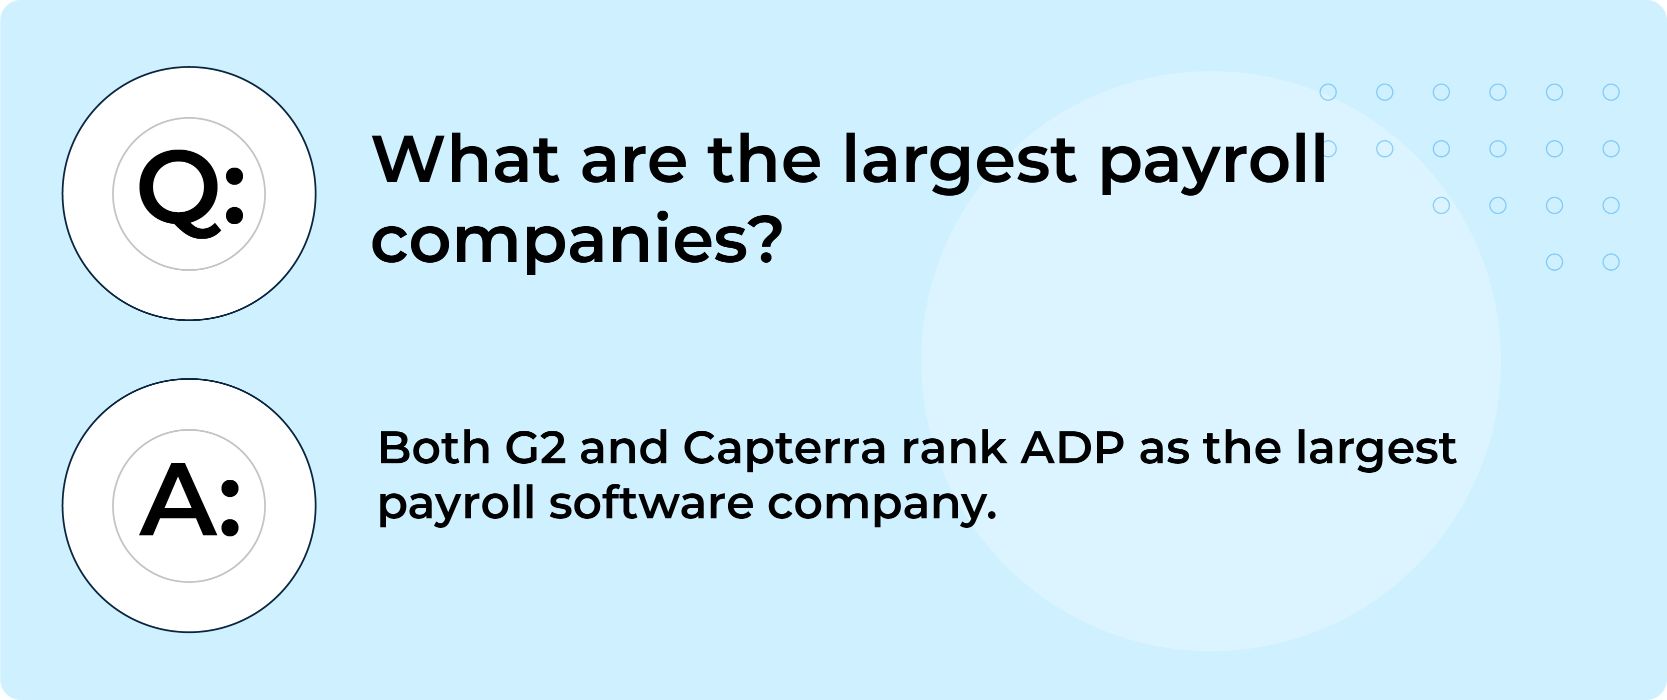 Who is the largest payroll company?